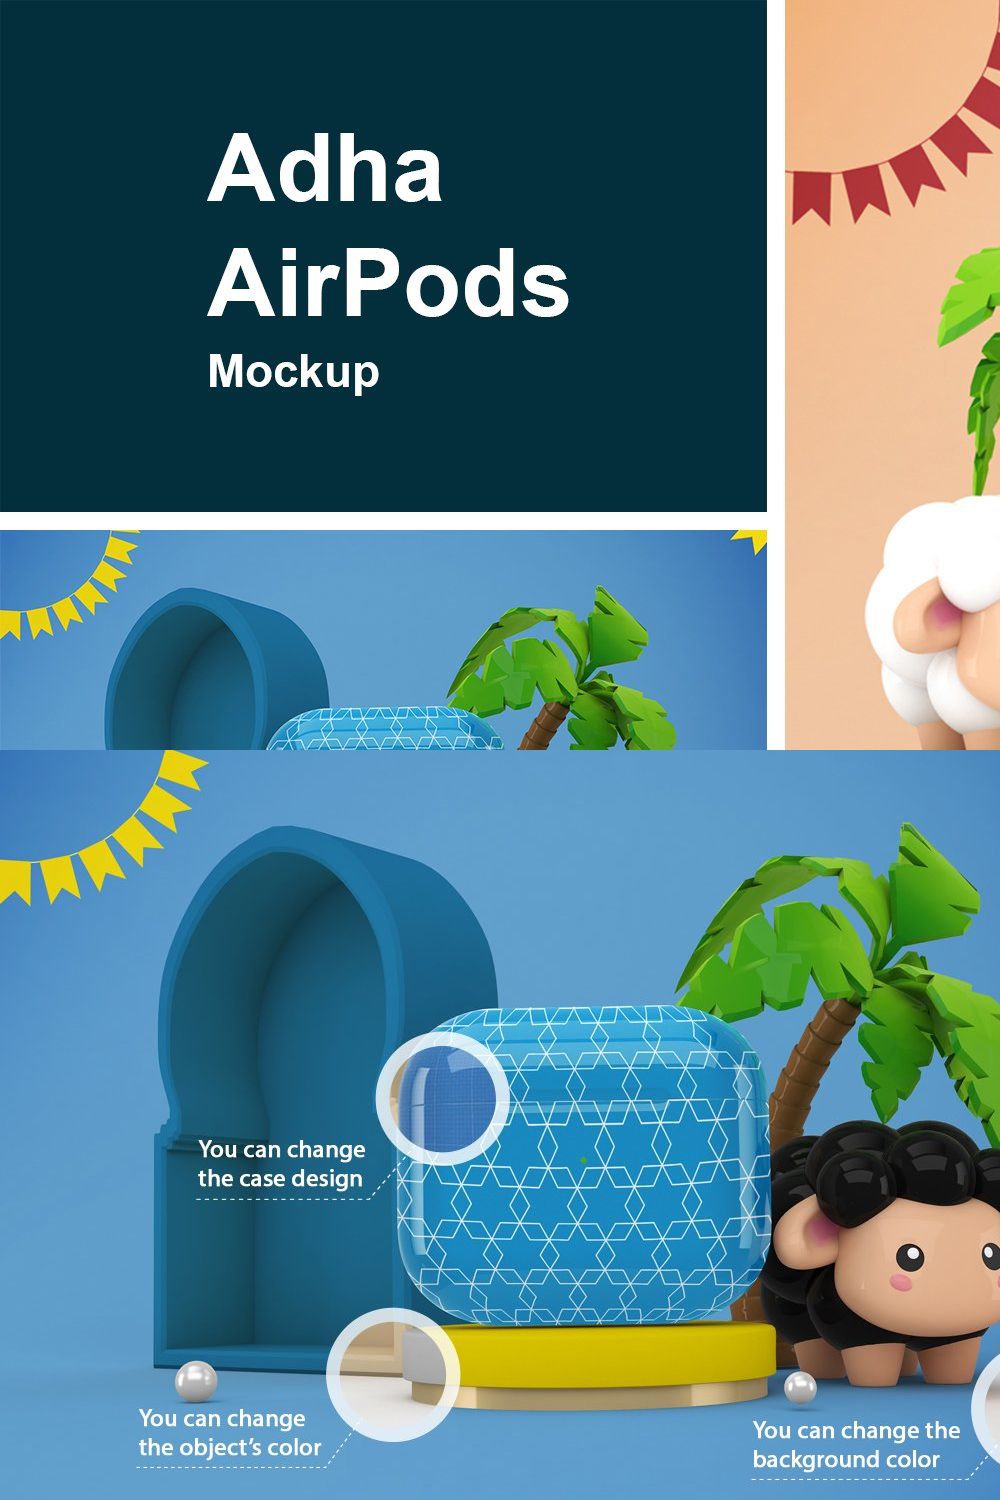 Adha AirPods Mockup pinterest preview image.